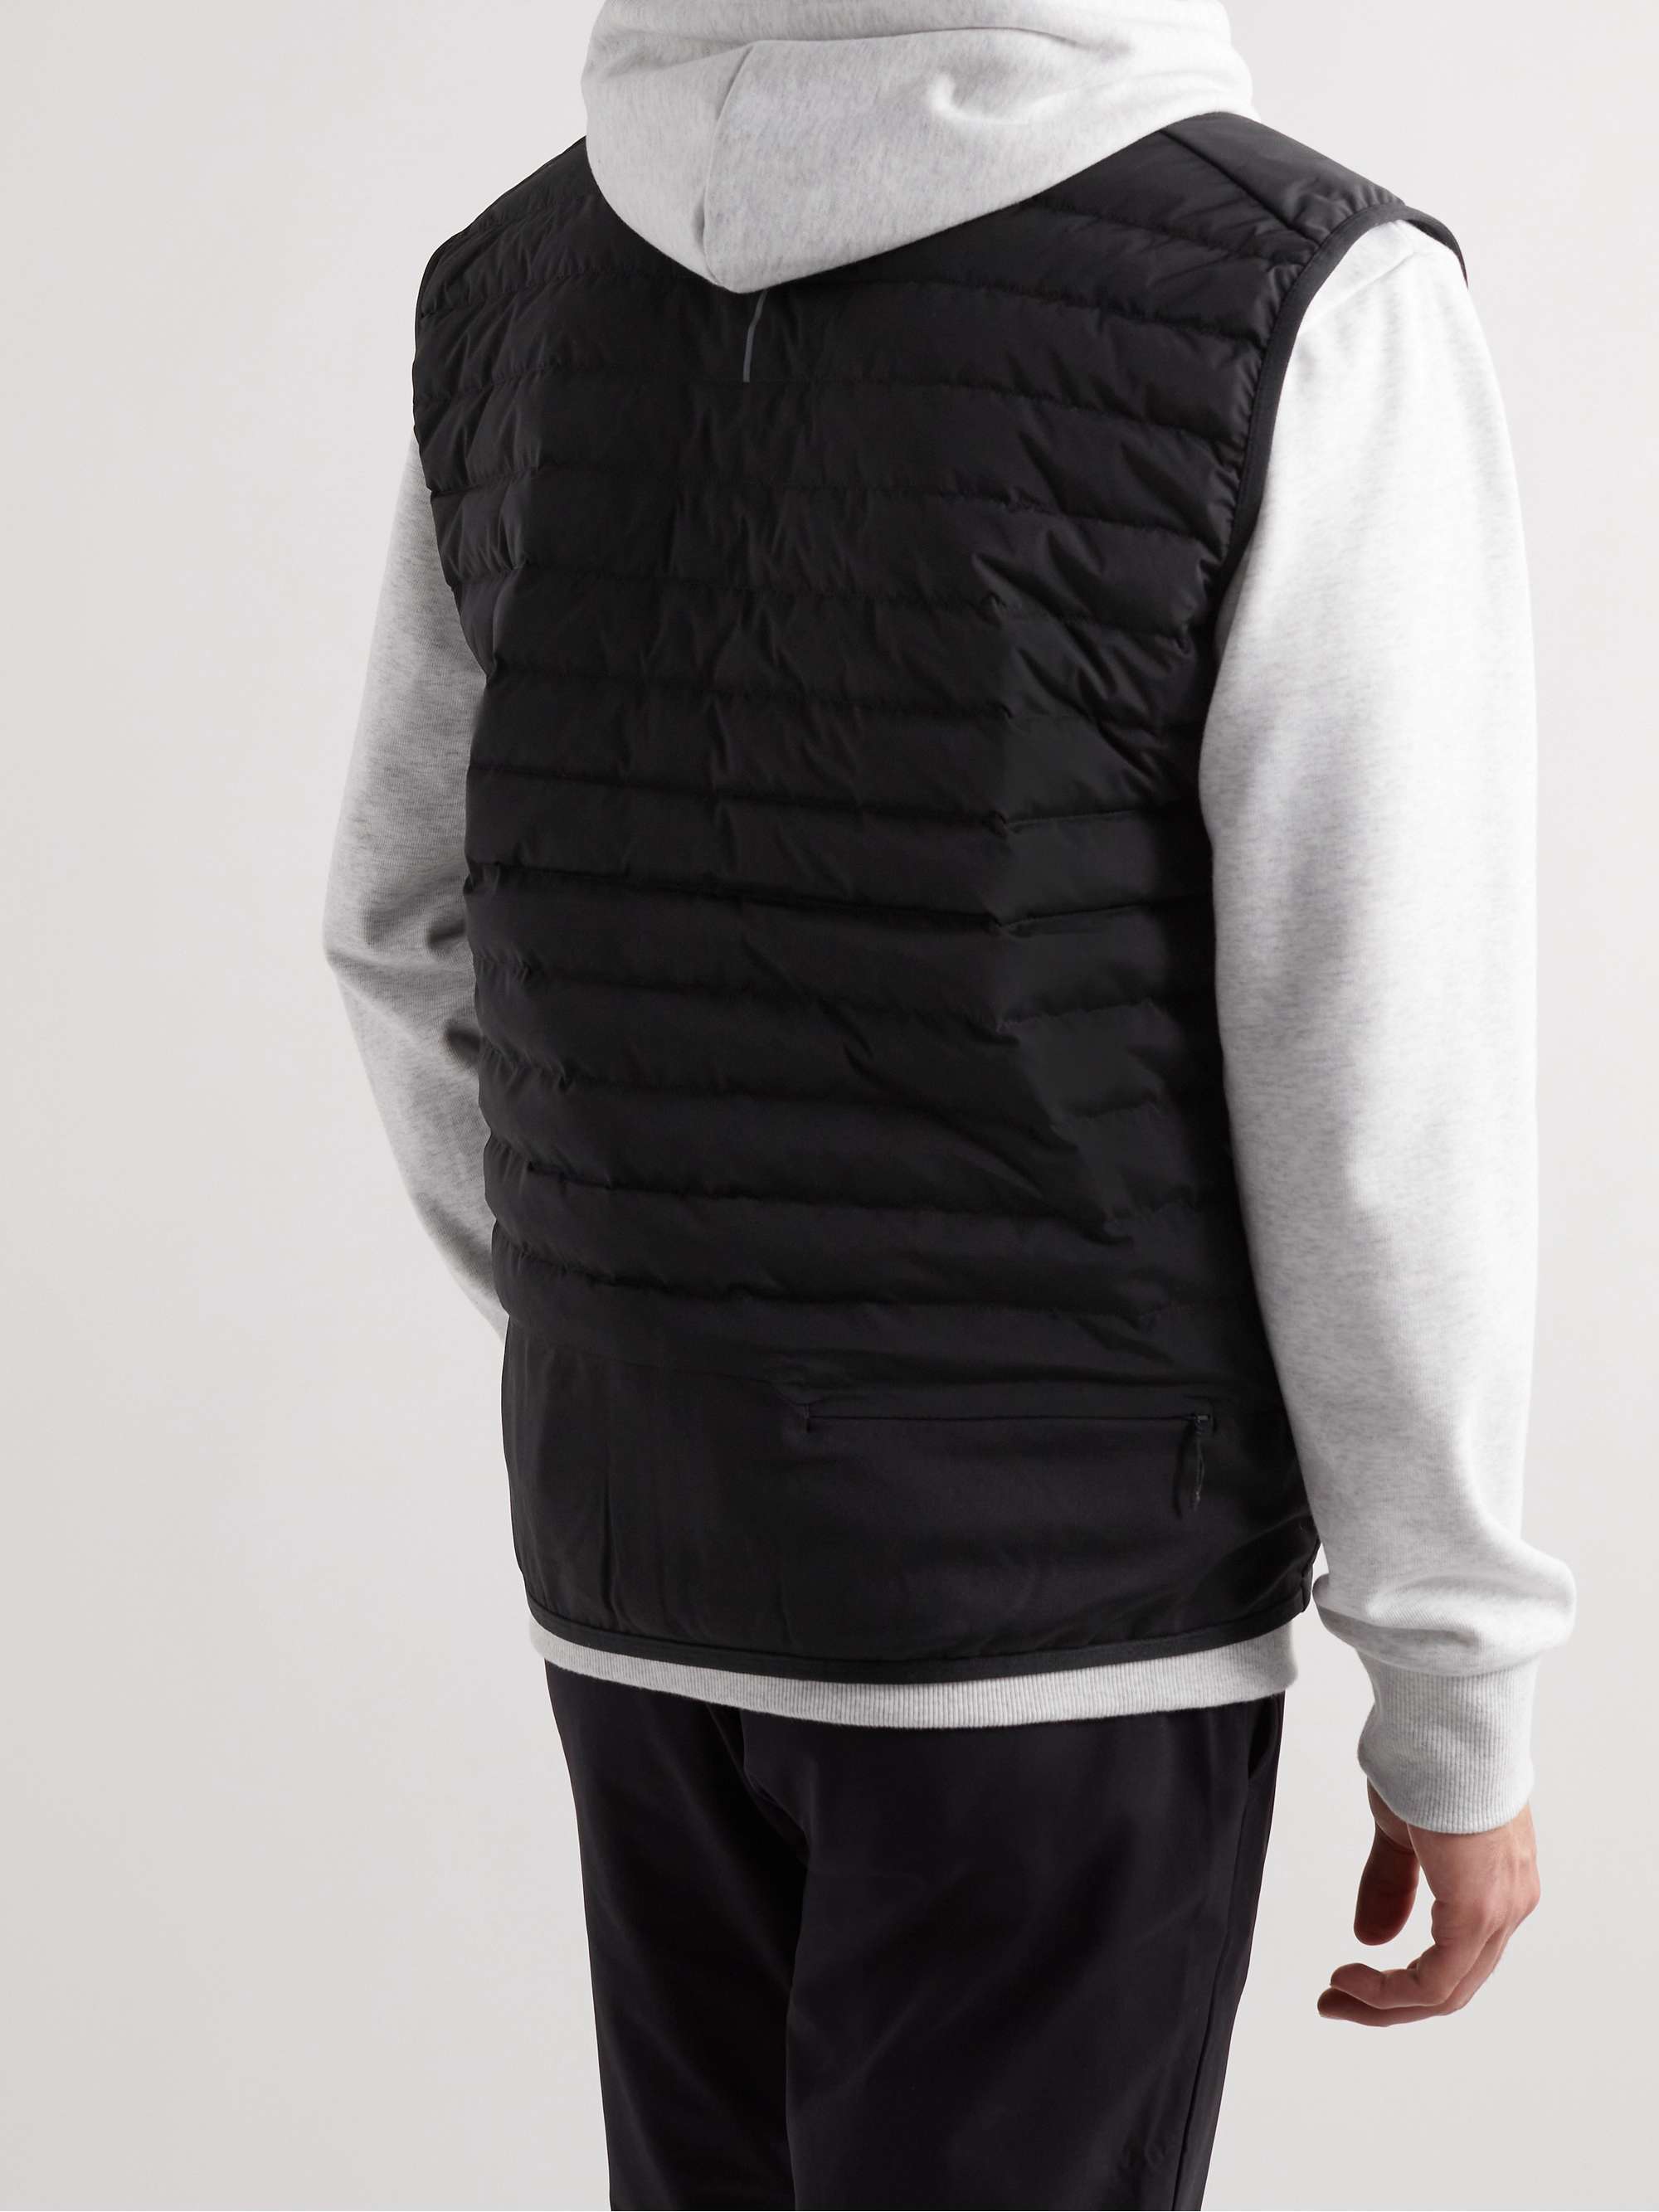 LULULEMON Down For It All Slim-Fit Quilted PrimaLoft Glyde Down Gilet